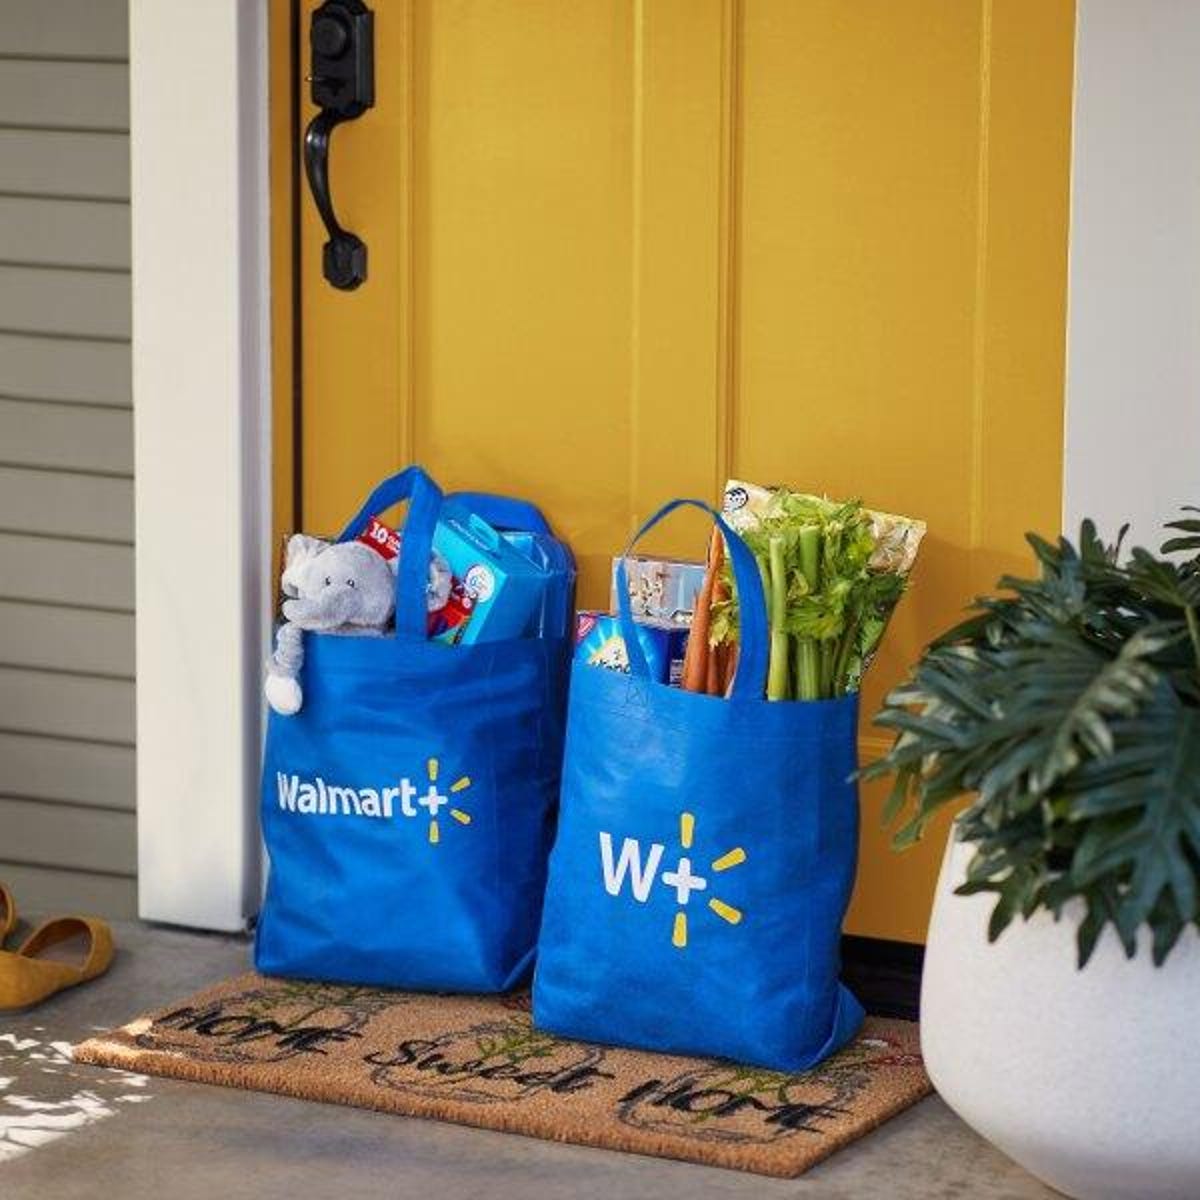 Walmart Plus review: A fast delivery service for groceries and everything  else - CNET